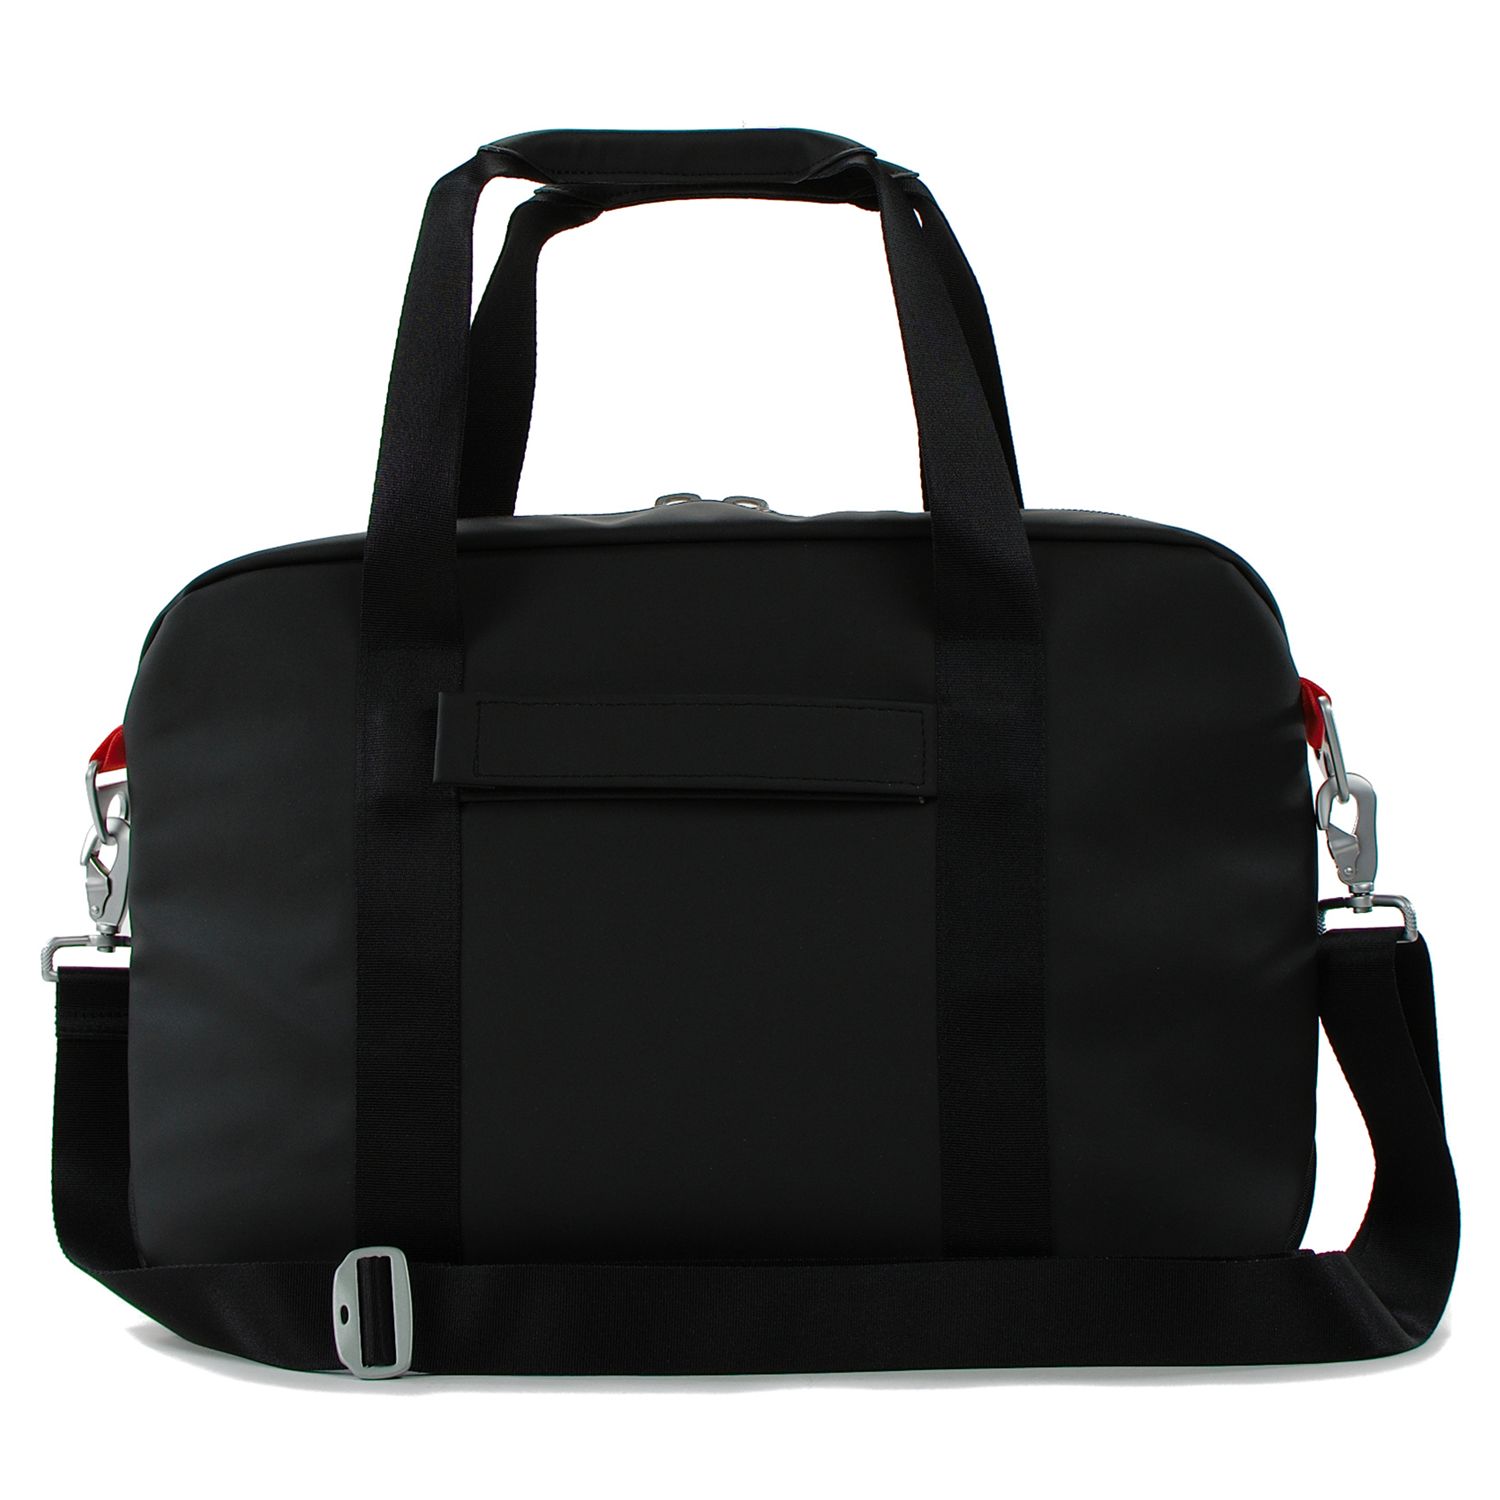 Acme Made North Point Attaché Work Bag for Laptops up to 15